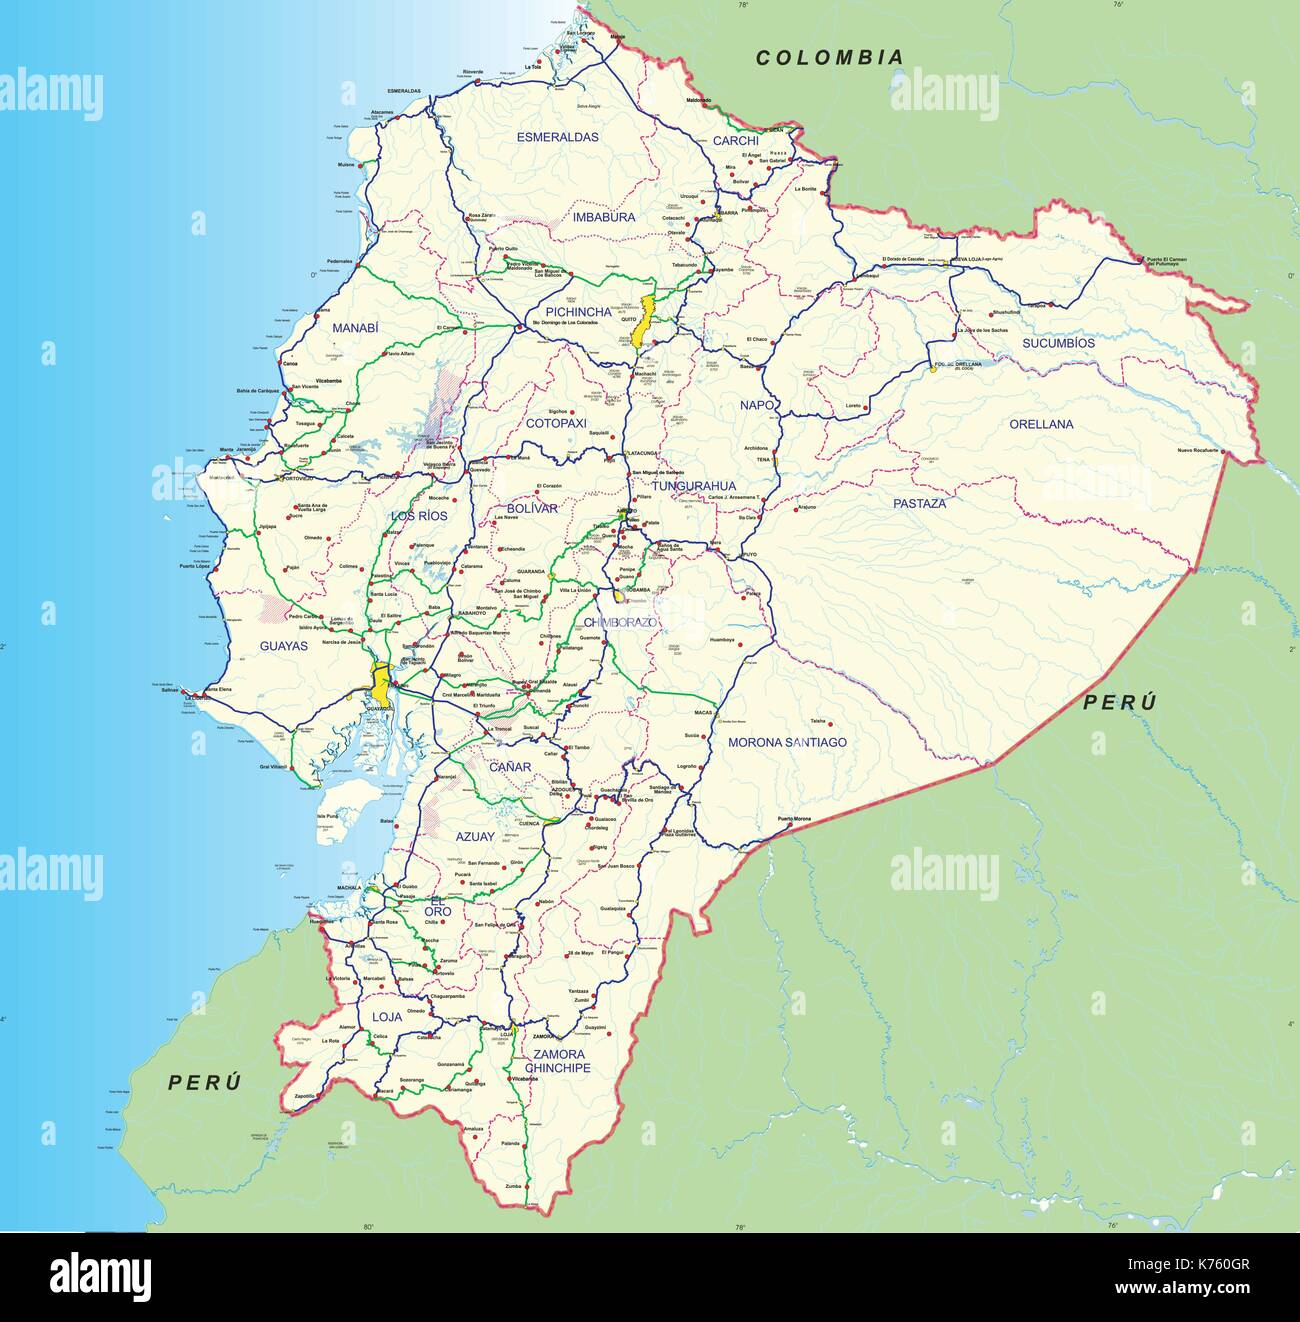 Road and hydro graphical map of Ecuador with the main roads, provincial boundaries, provincial capitals and main cities names - Year 2004 - Vector Stock Vector